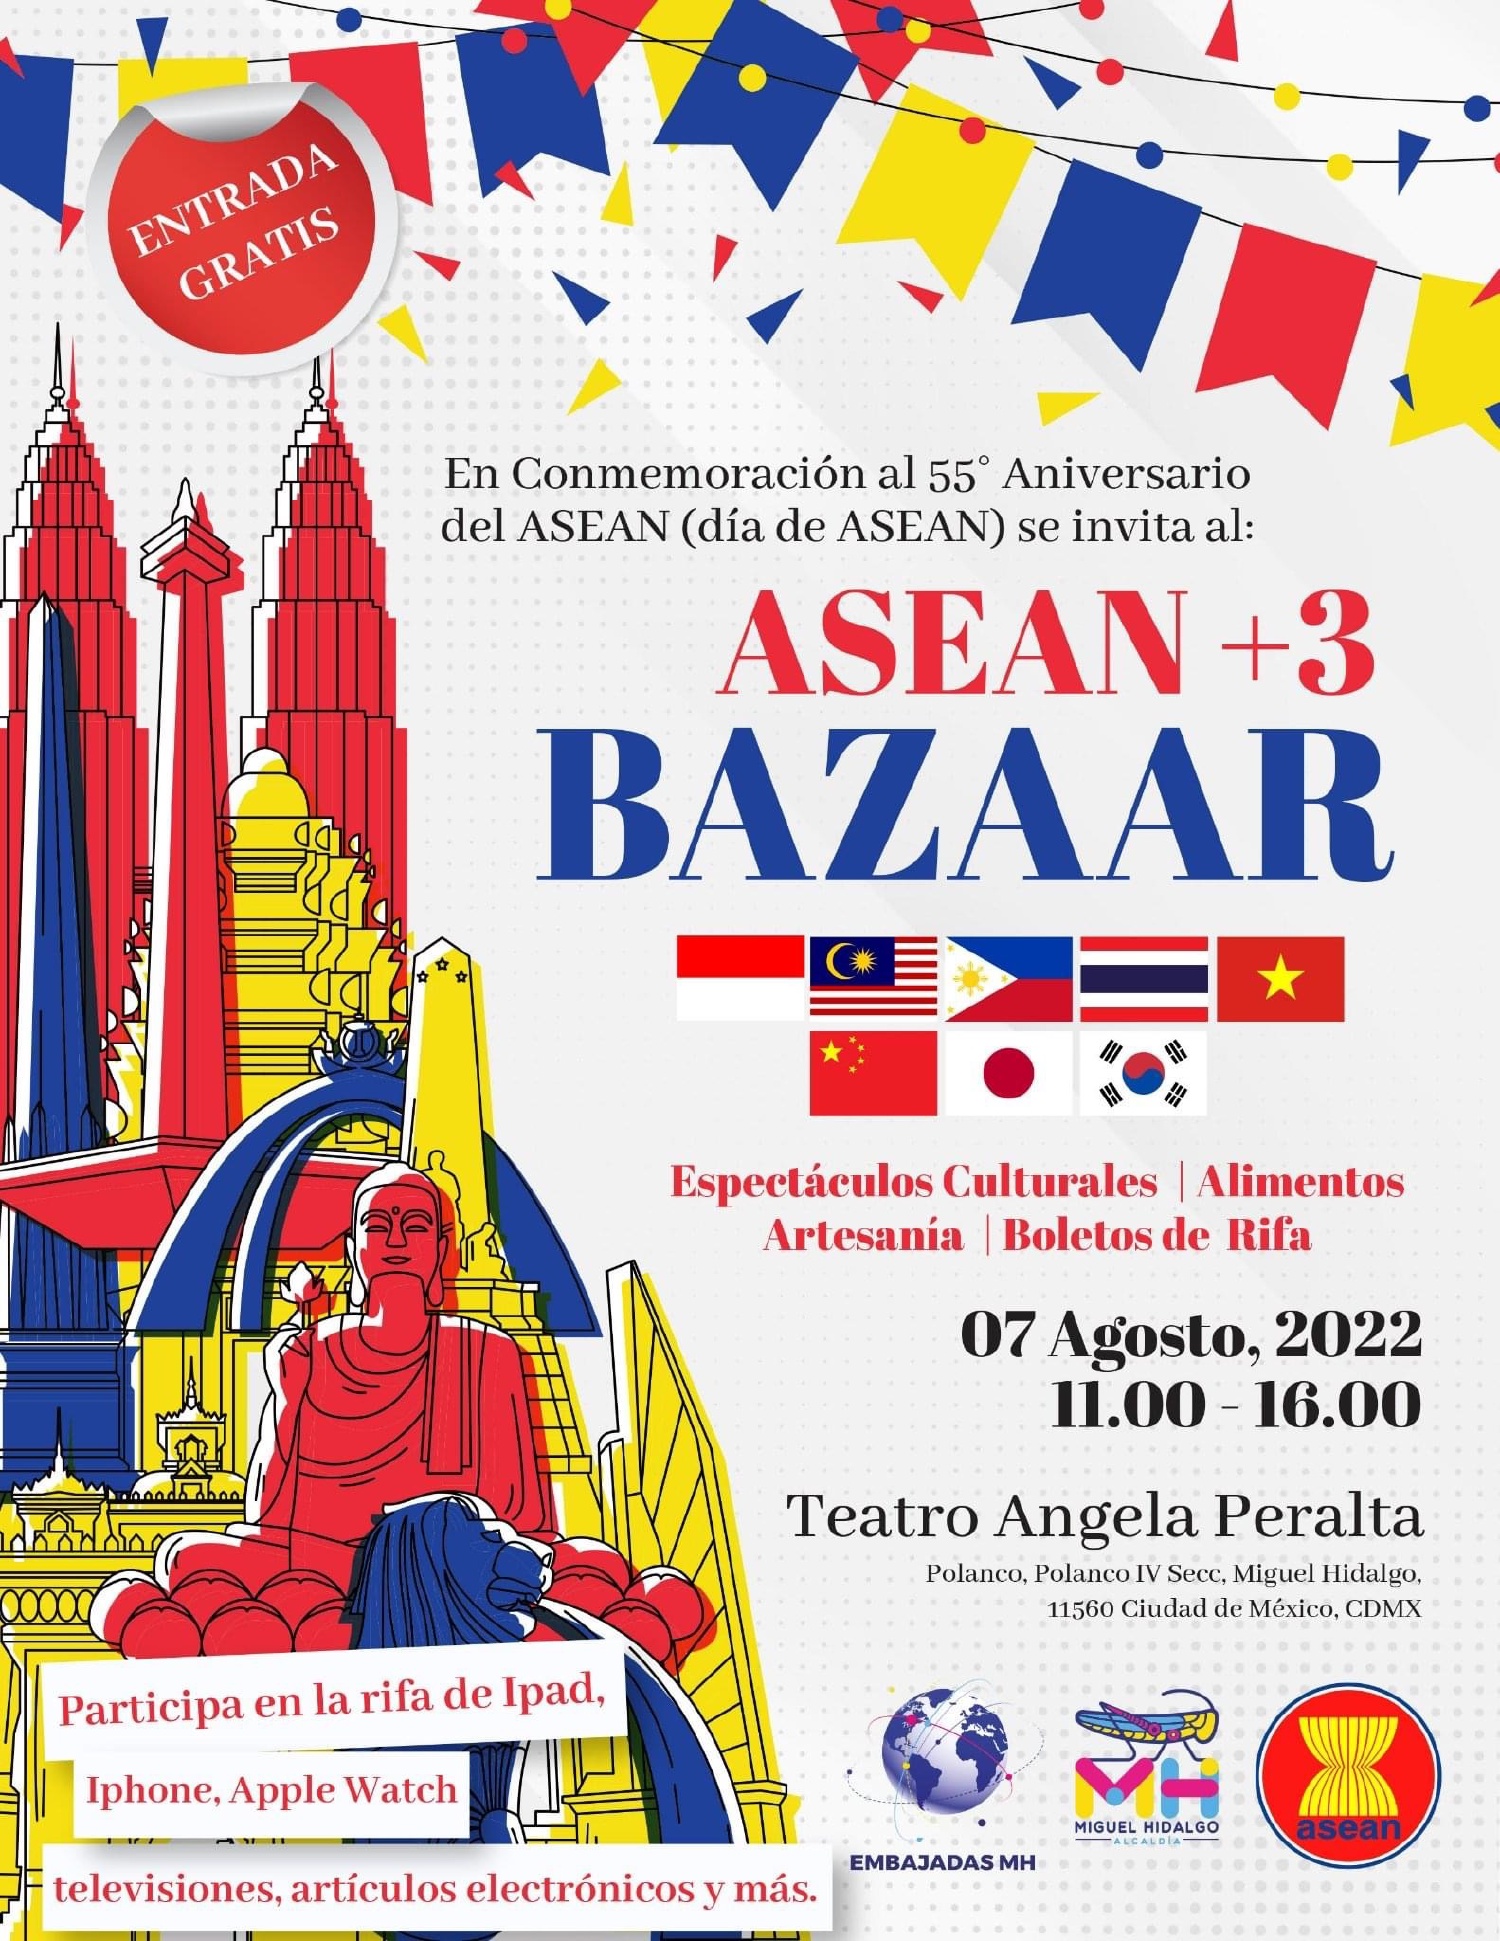 Here's the poster for the bazaar. So glad we went!